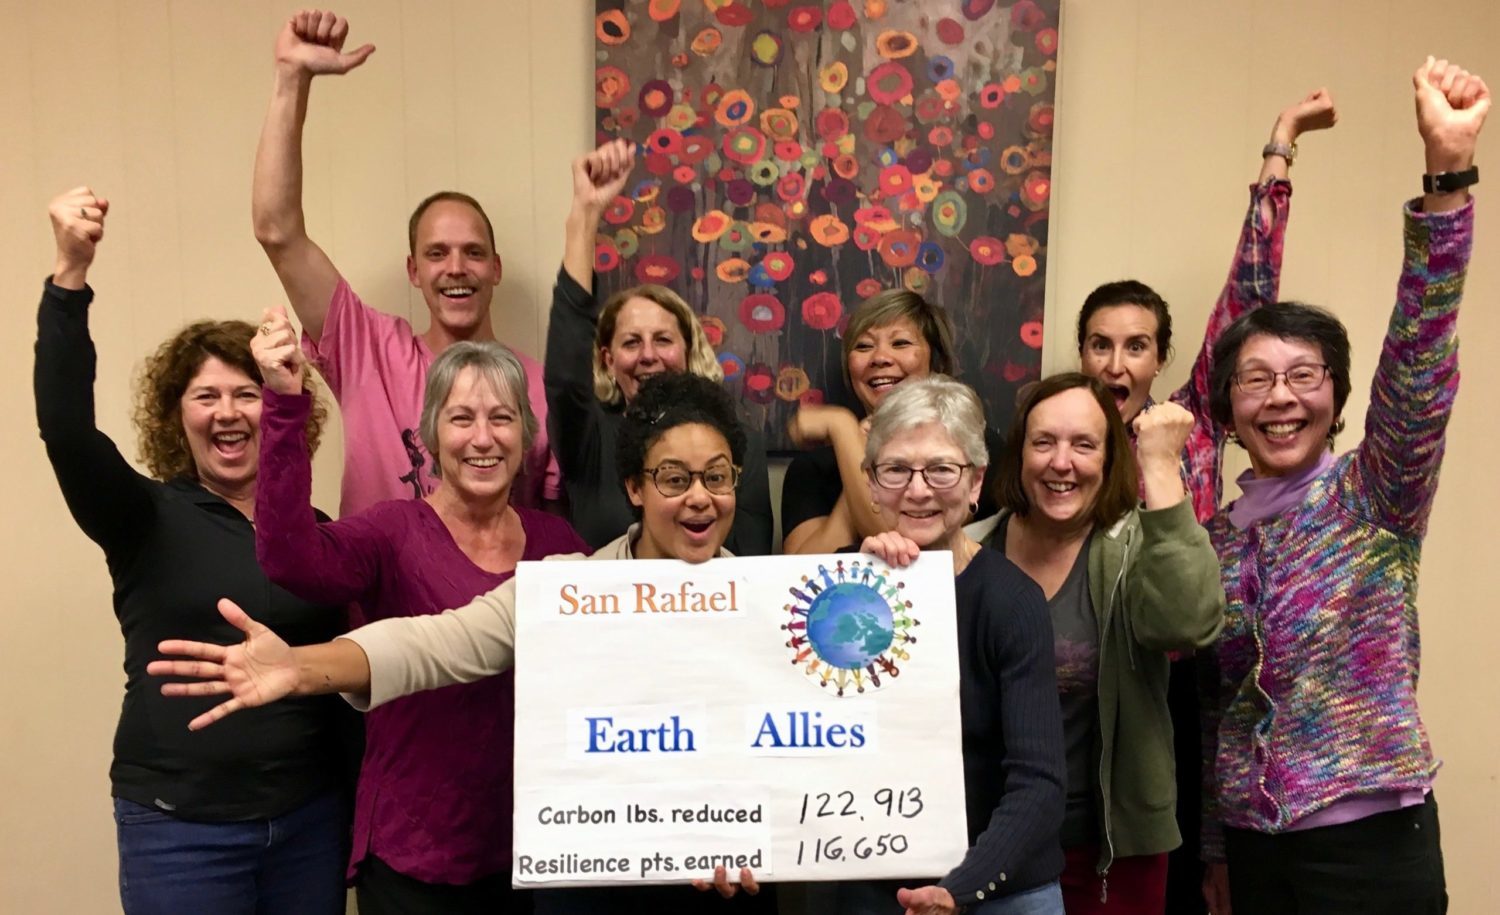 Resilient Neighborhoods member group celebrating together with sign that reads Earth Allies